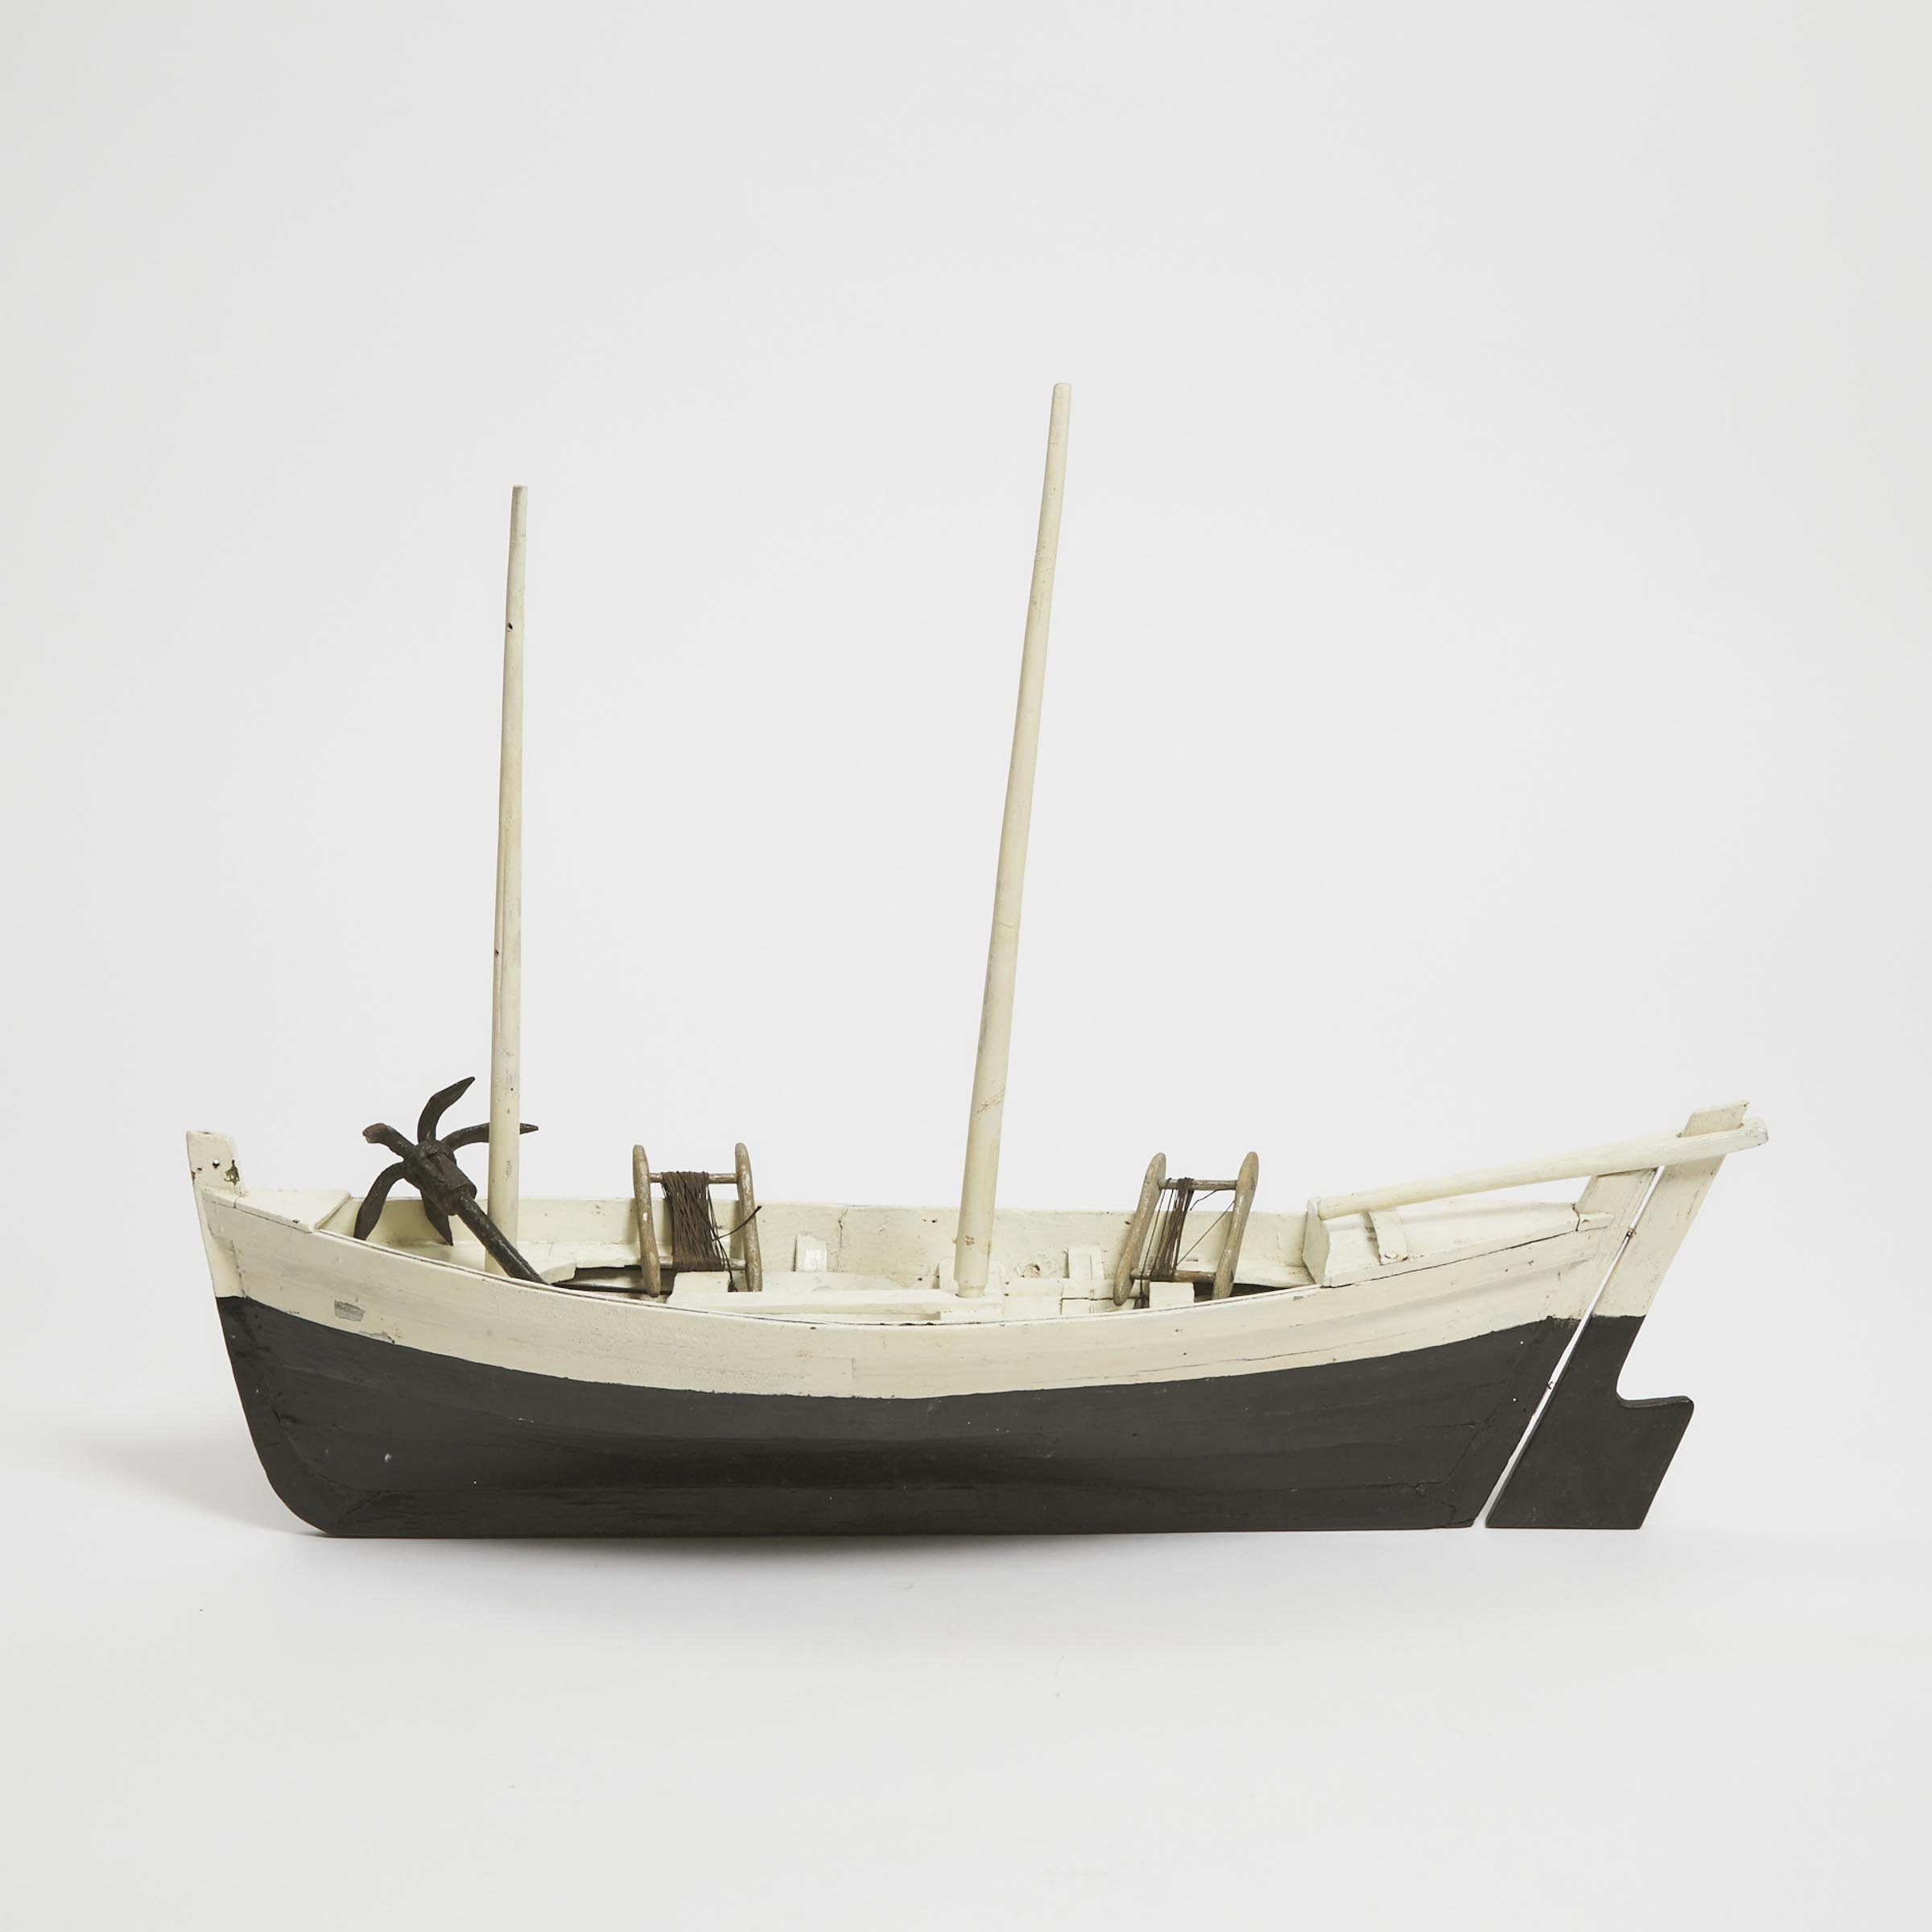 Polychromed Wooden Model of a St. Lawrence River Skiff, Quebec, early/mid 20th century